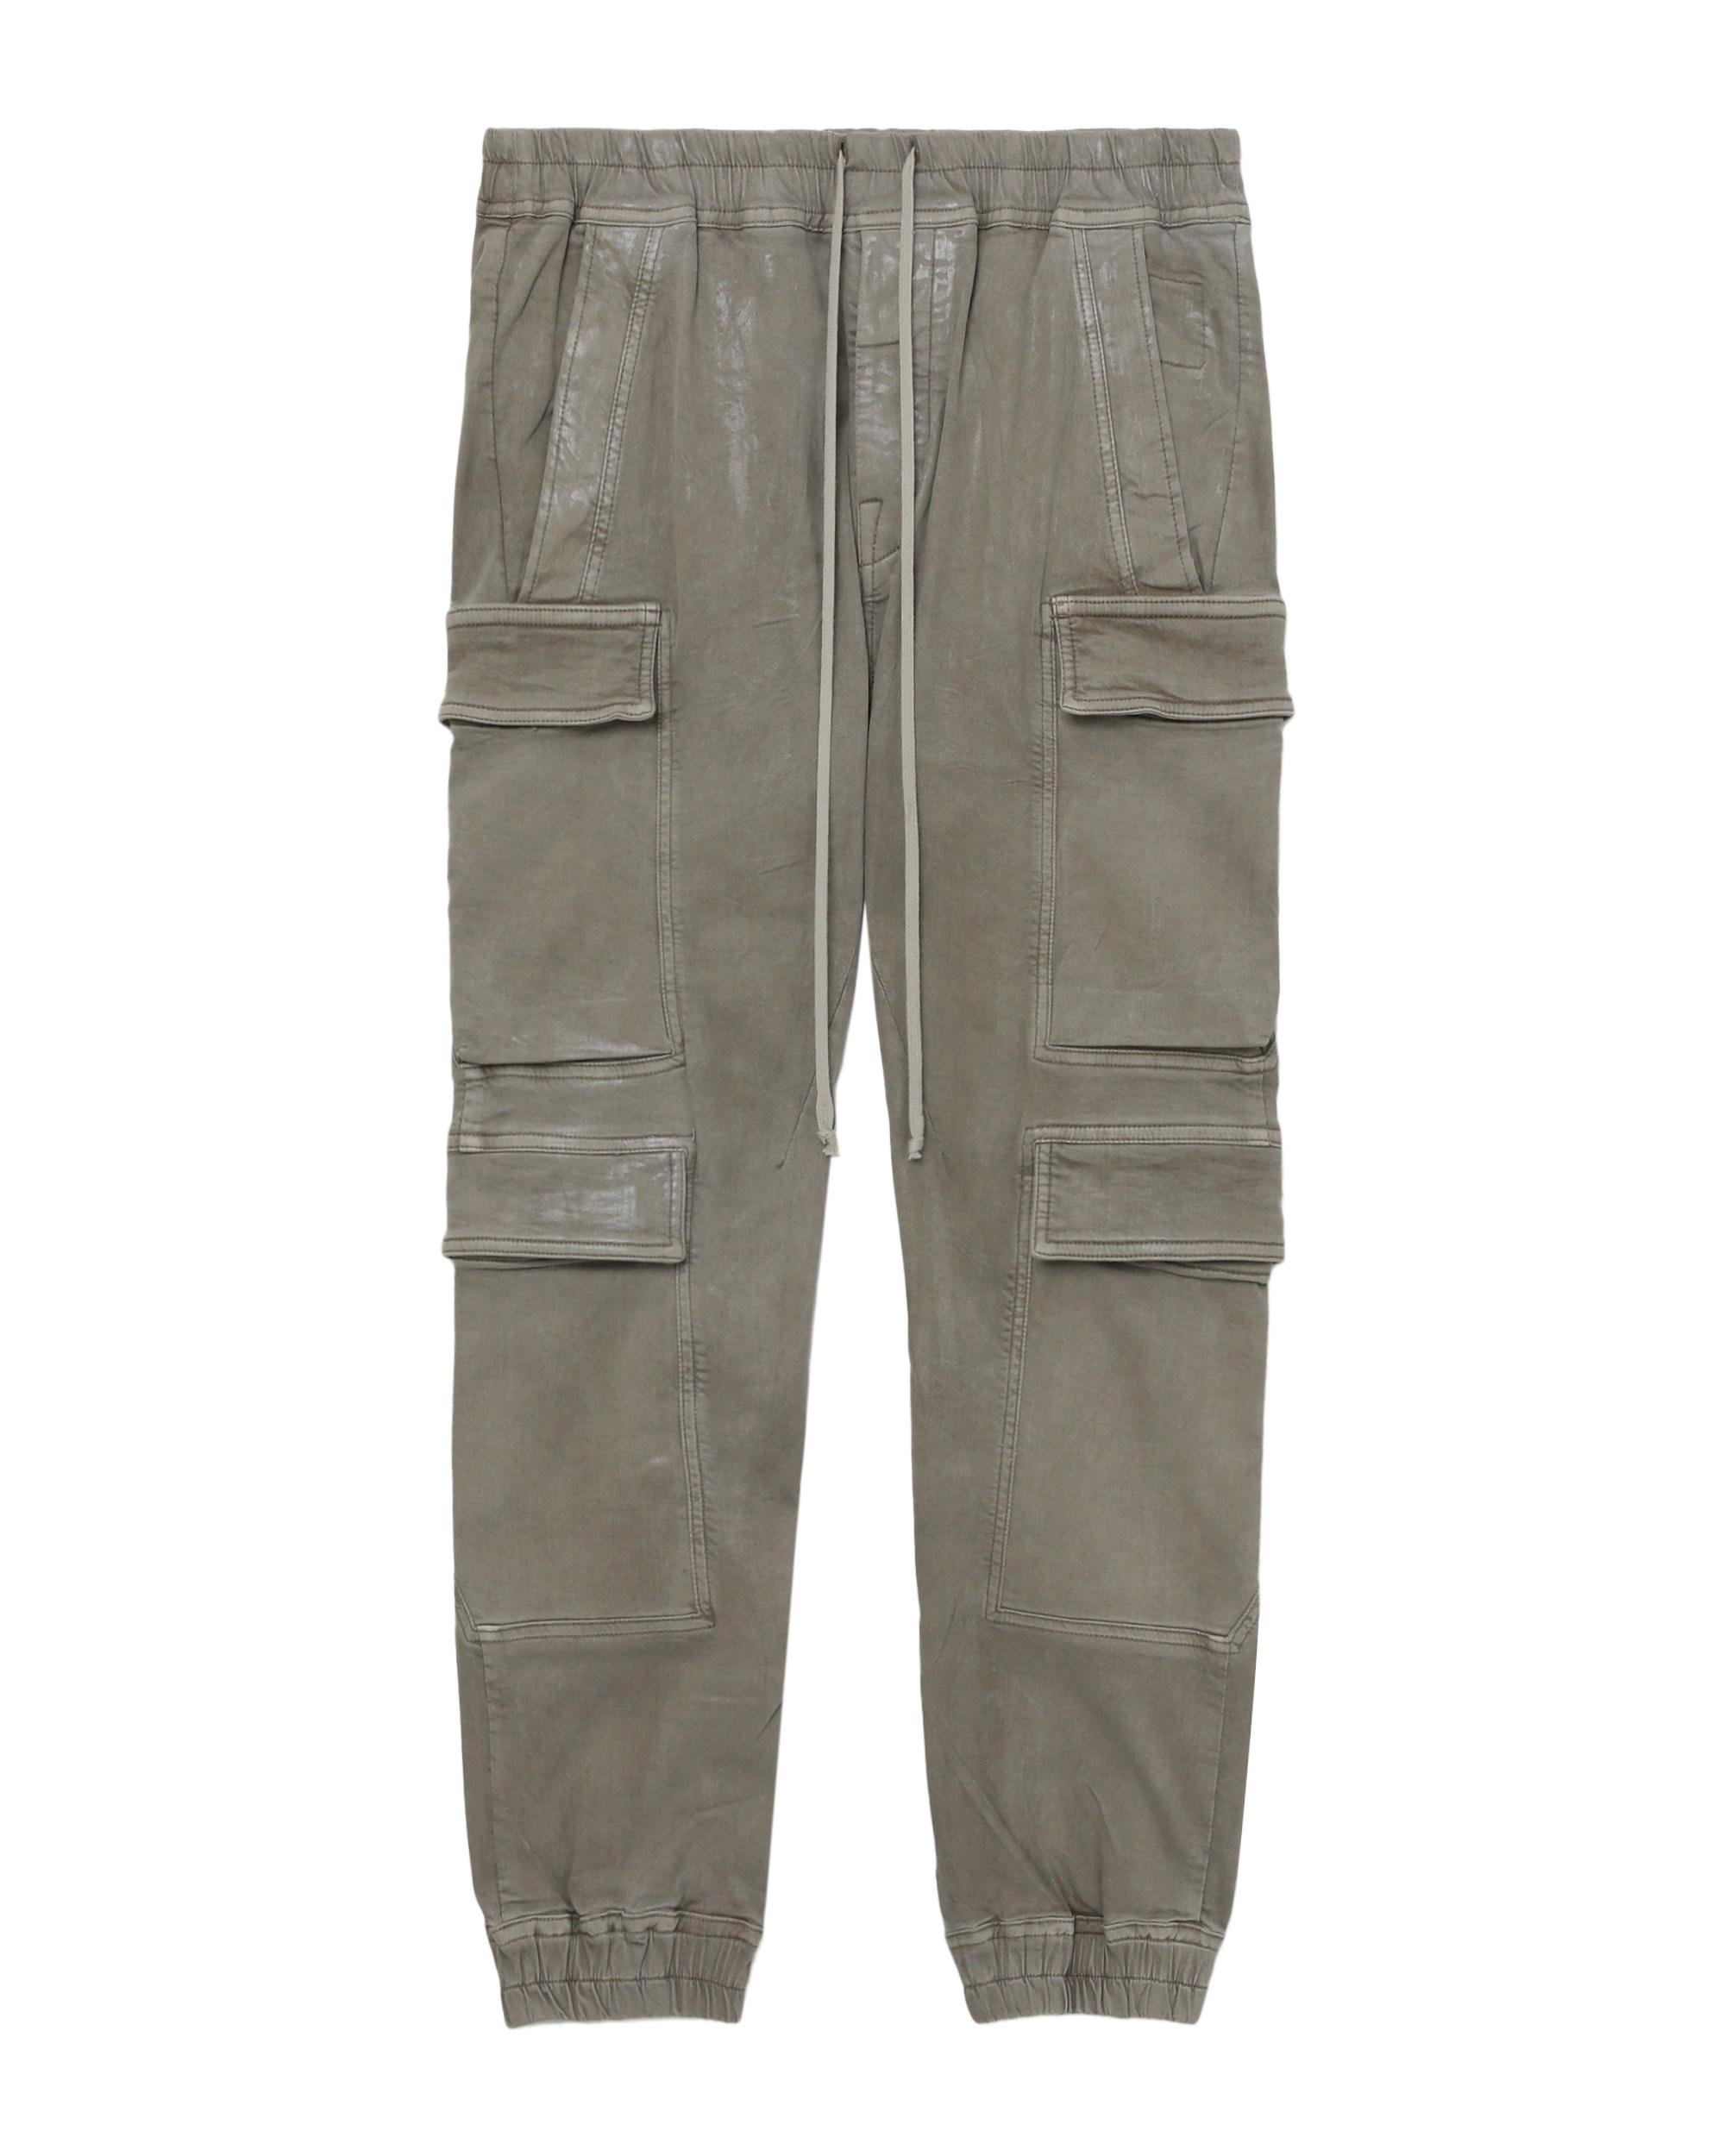 Cargo jeans by RICK OWENS DRKSHDW